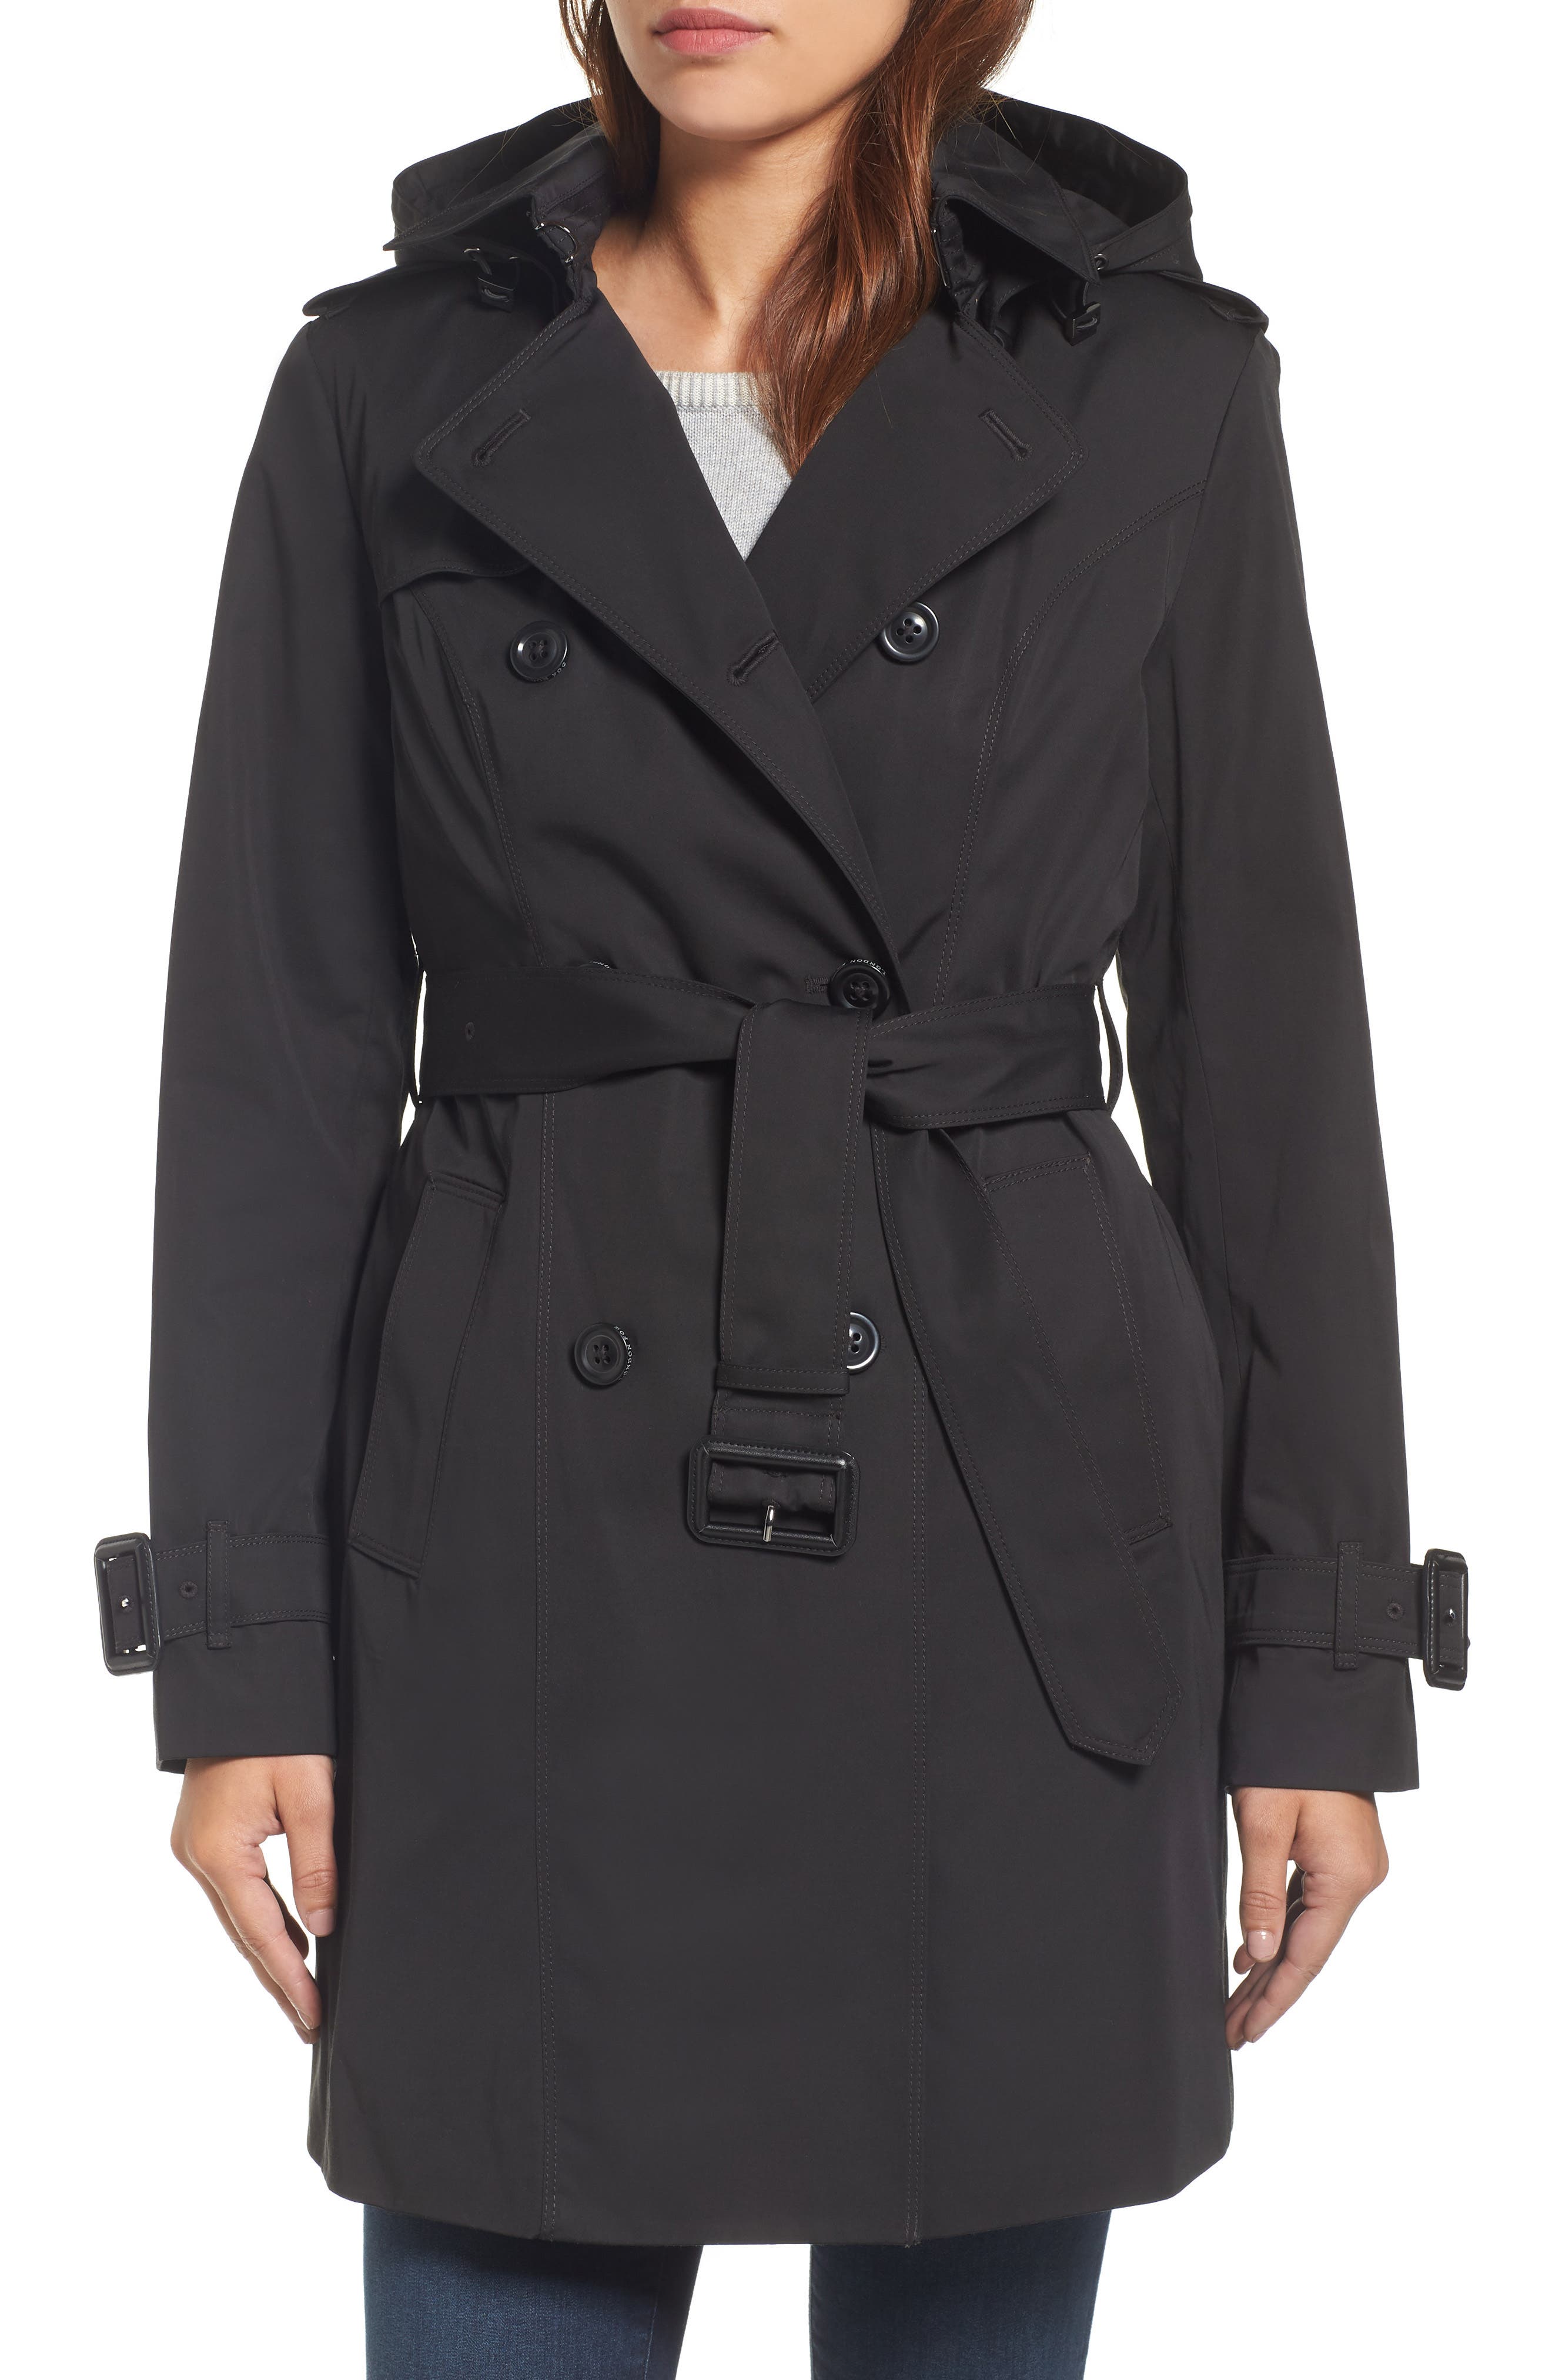 london fog heritage trench coat with detachable liner